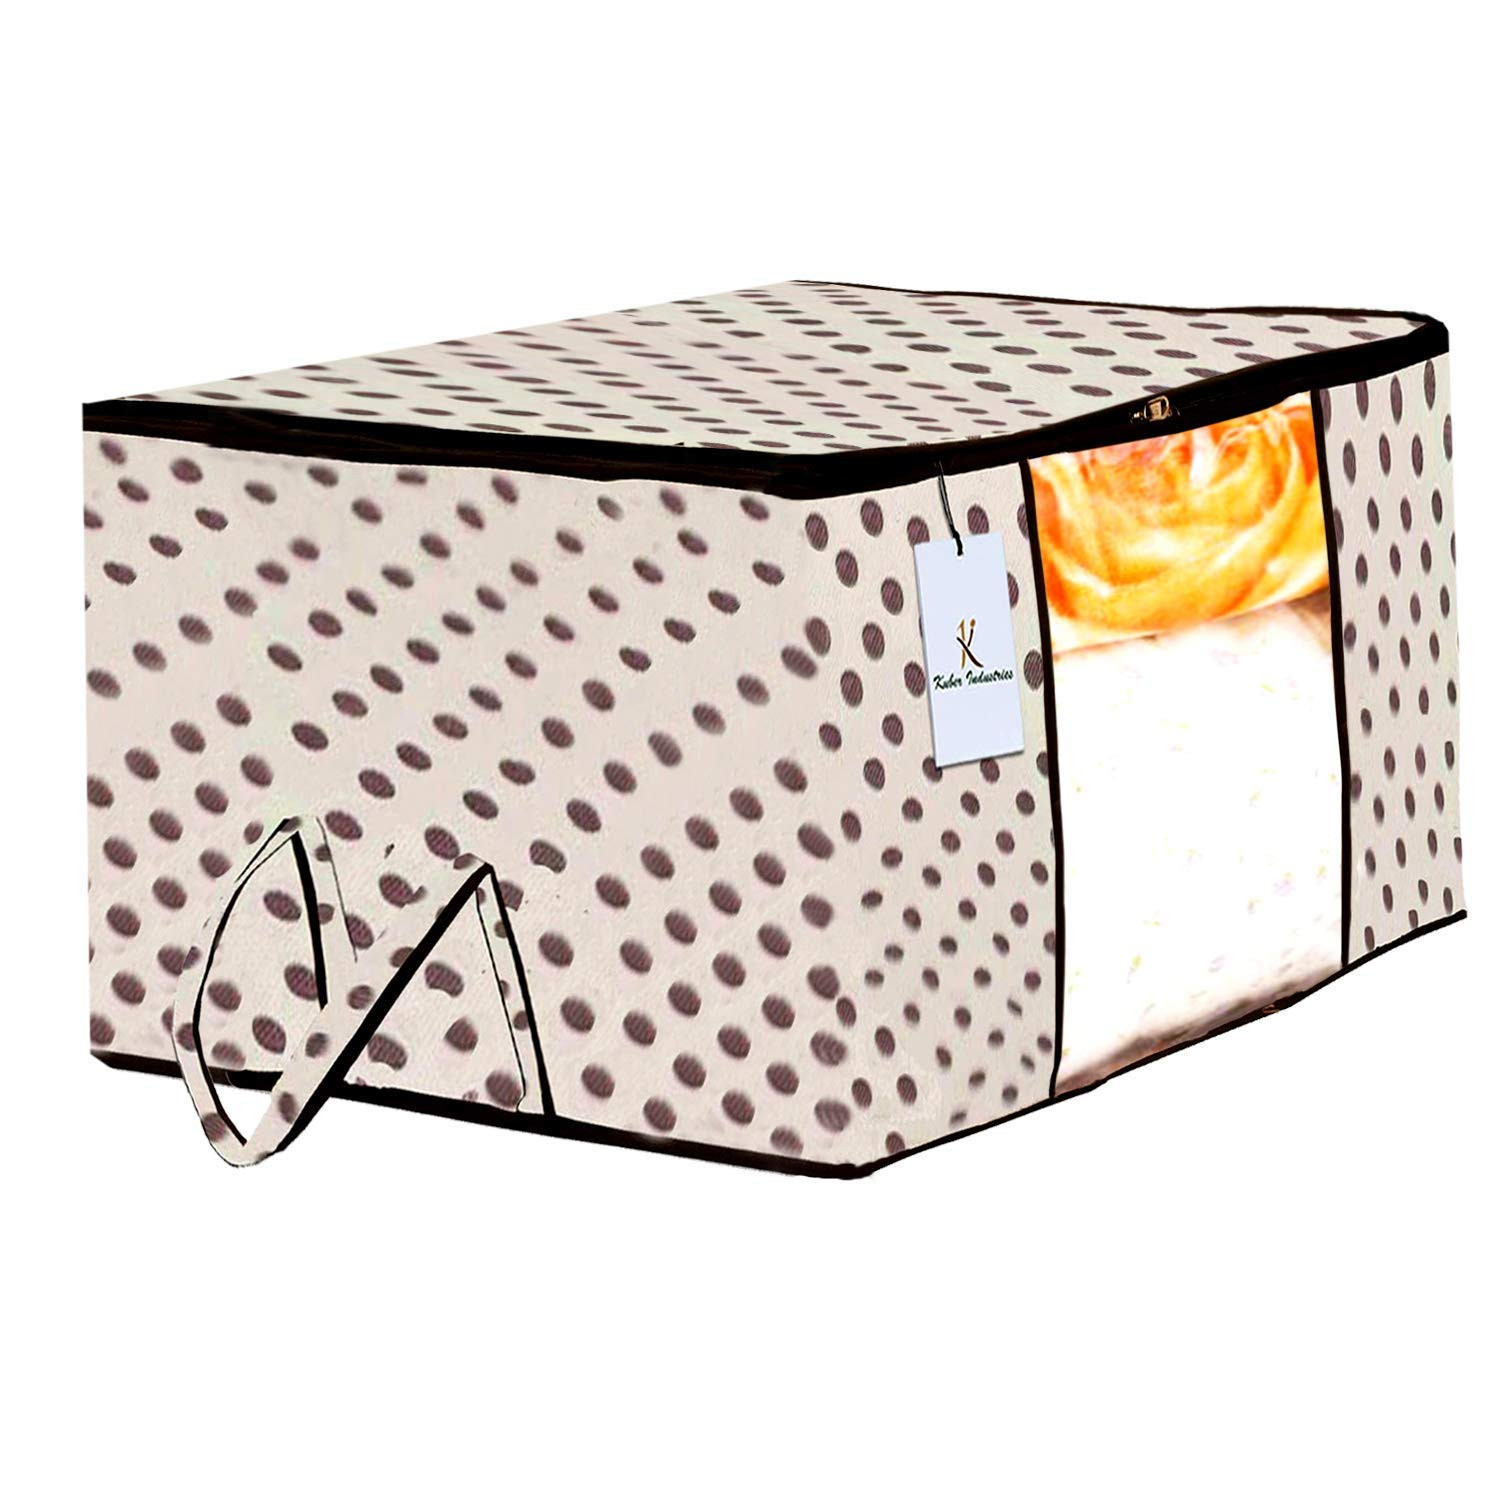 Kuber Industries Polka Dot Design Non Woven Fabric Underbed Storage Bag,Cloth Organiser,Blanket Cover with Transparent Window, Cream & White -CTKTC41039